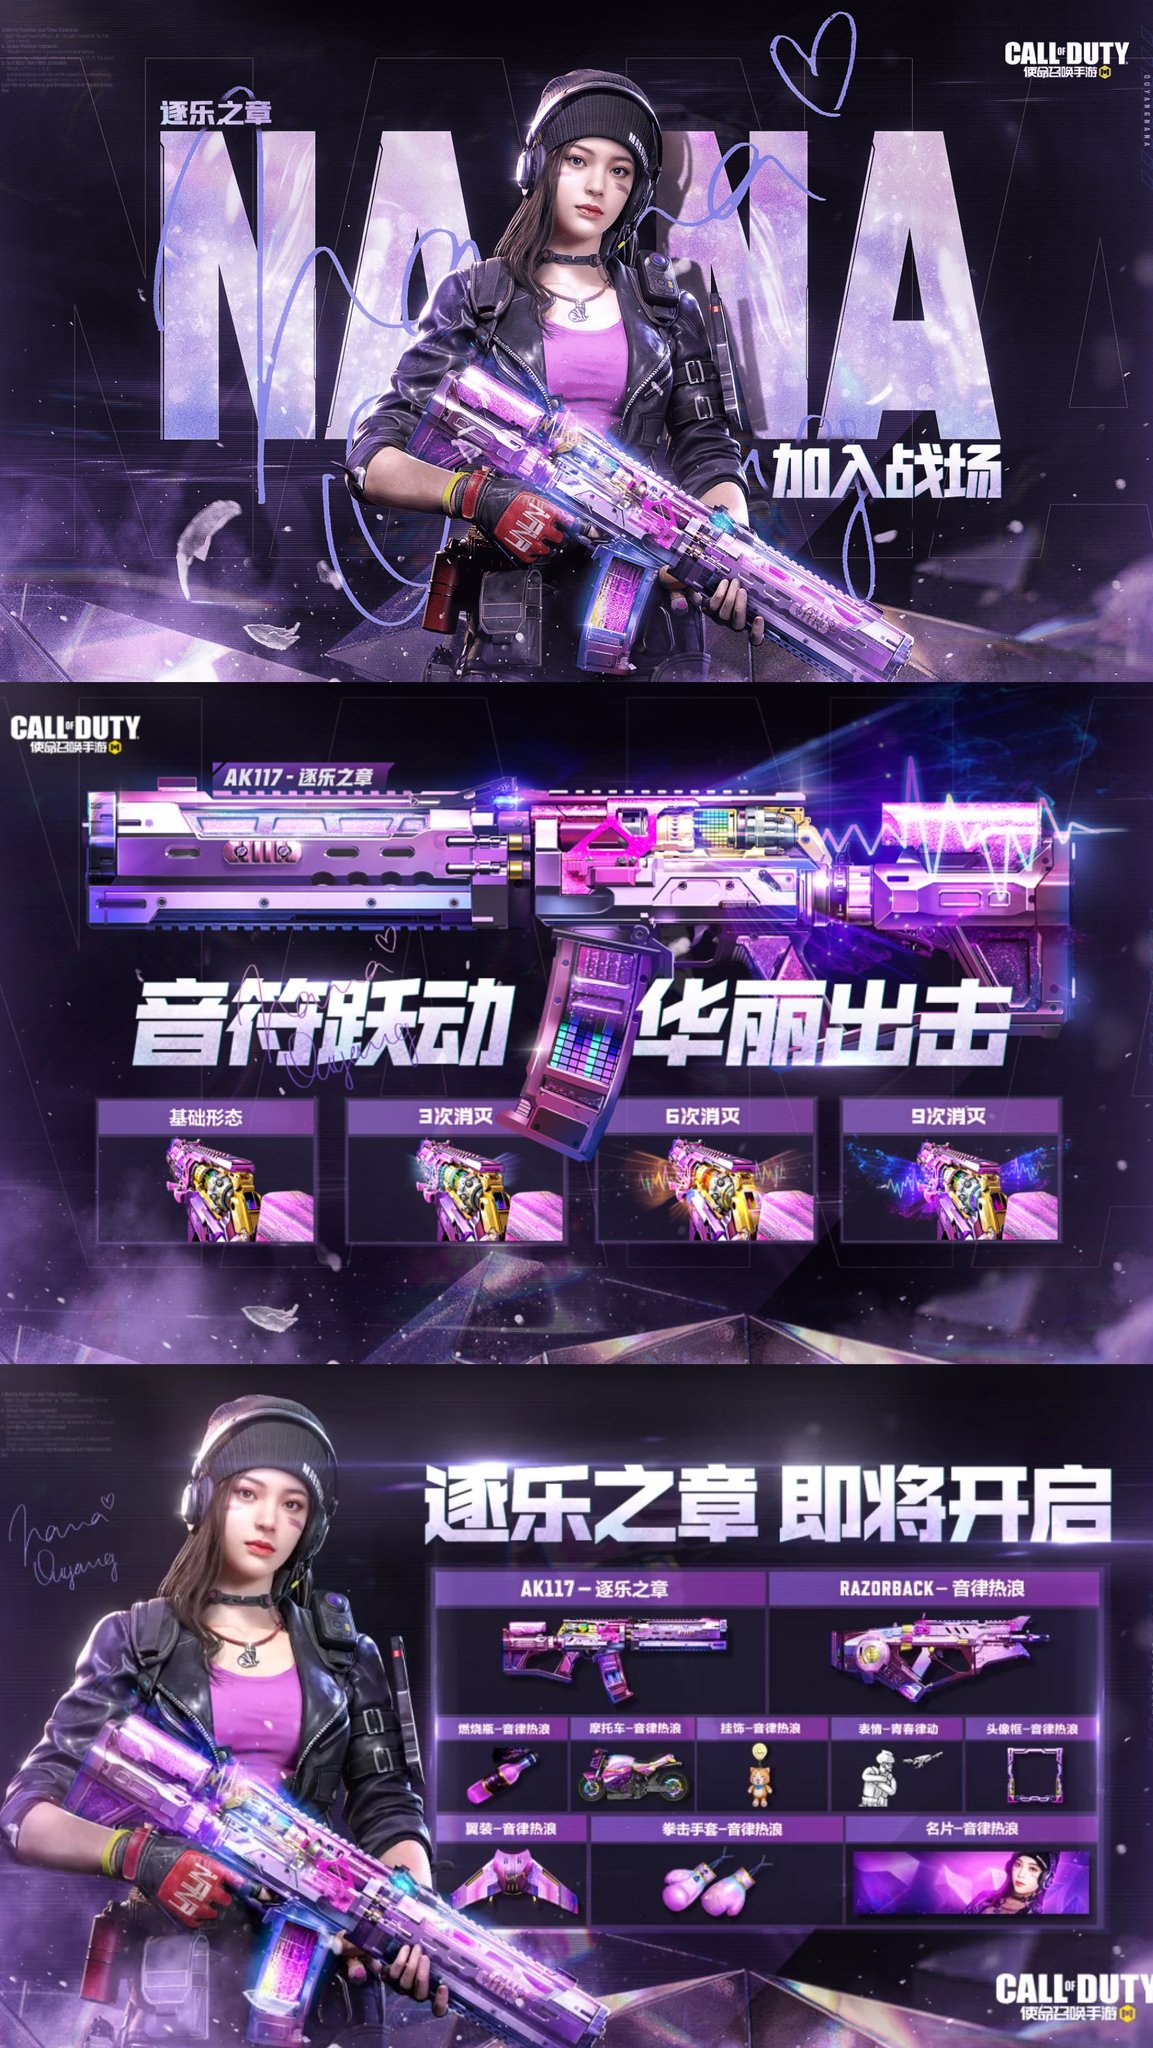 Dataminers Hole  CODM LEAKS on X: In-game look and 3d model of upcoming  character in Chinese version- Nana Based on Taiwanese actress Nana Ou-Yang  Note: WILL NOT COME TO GLOBAL  /